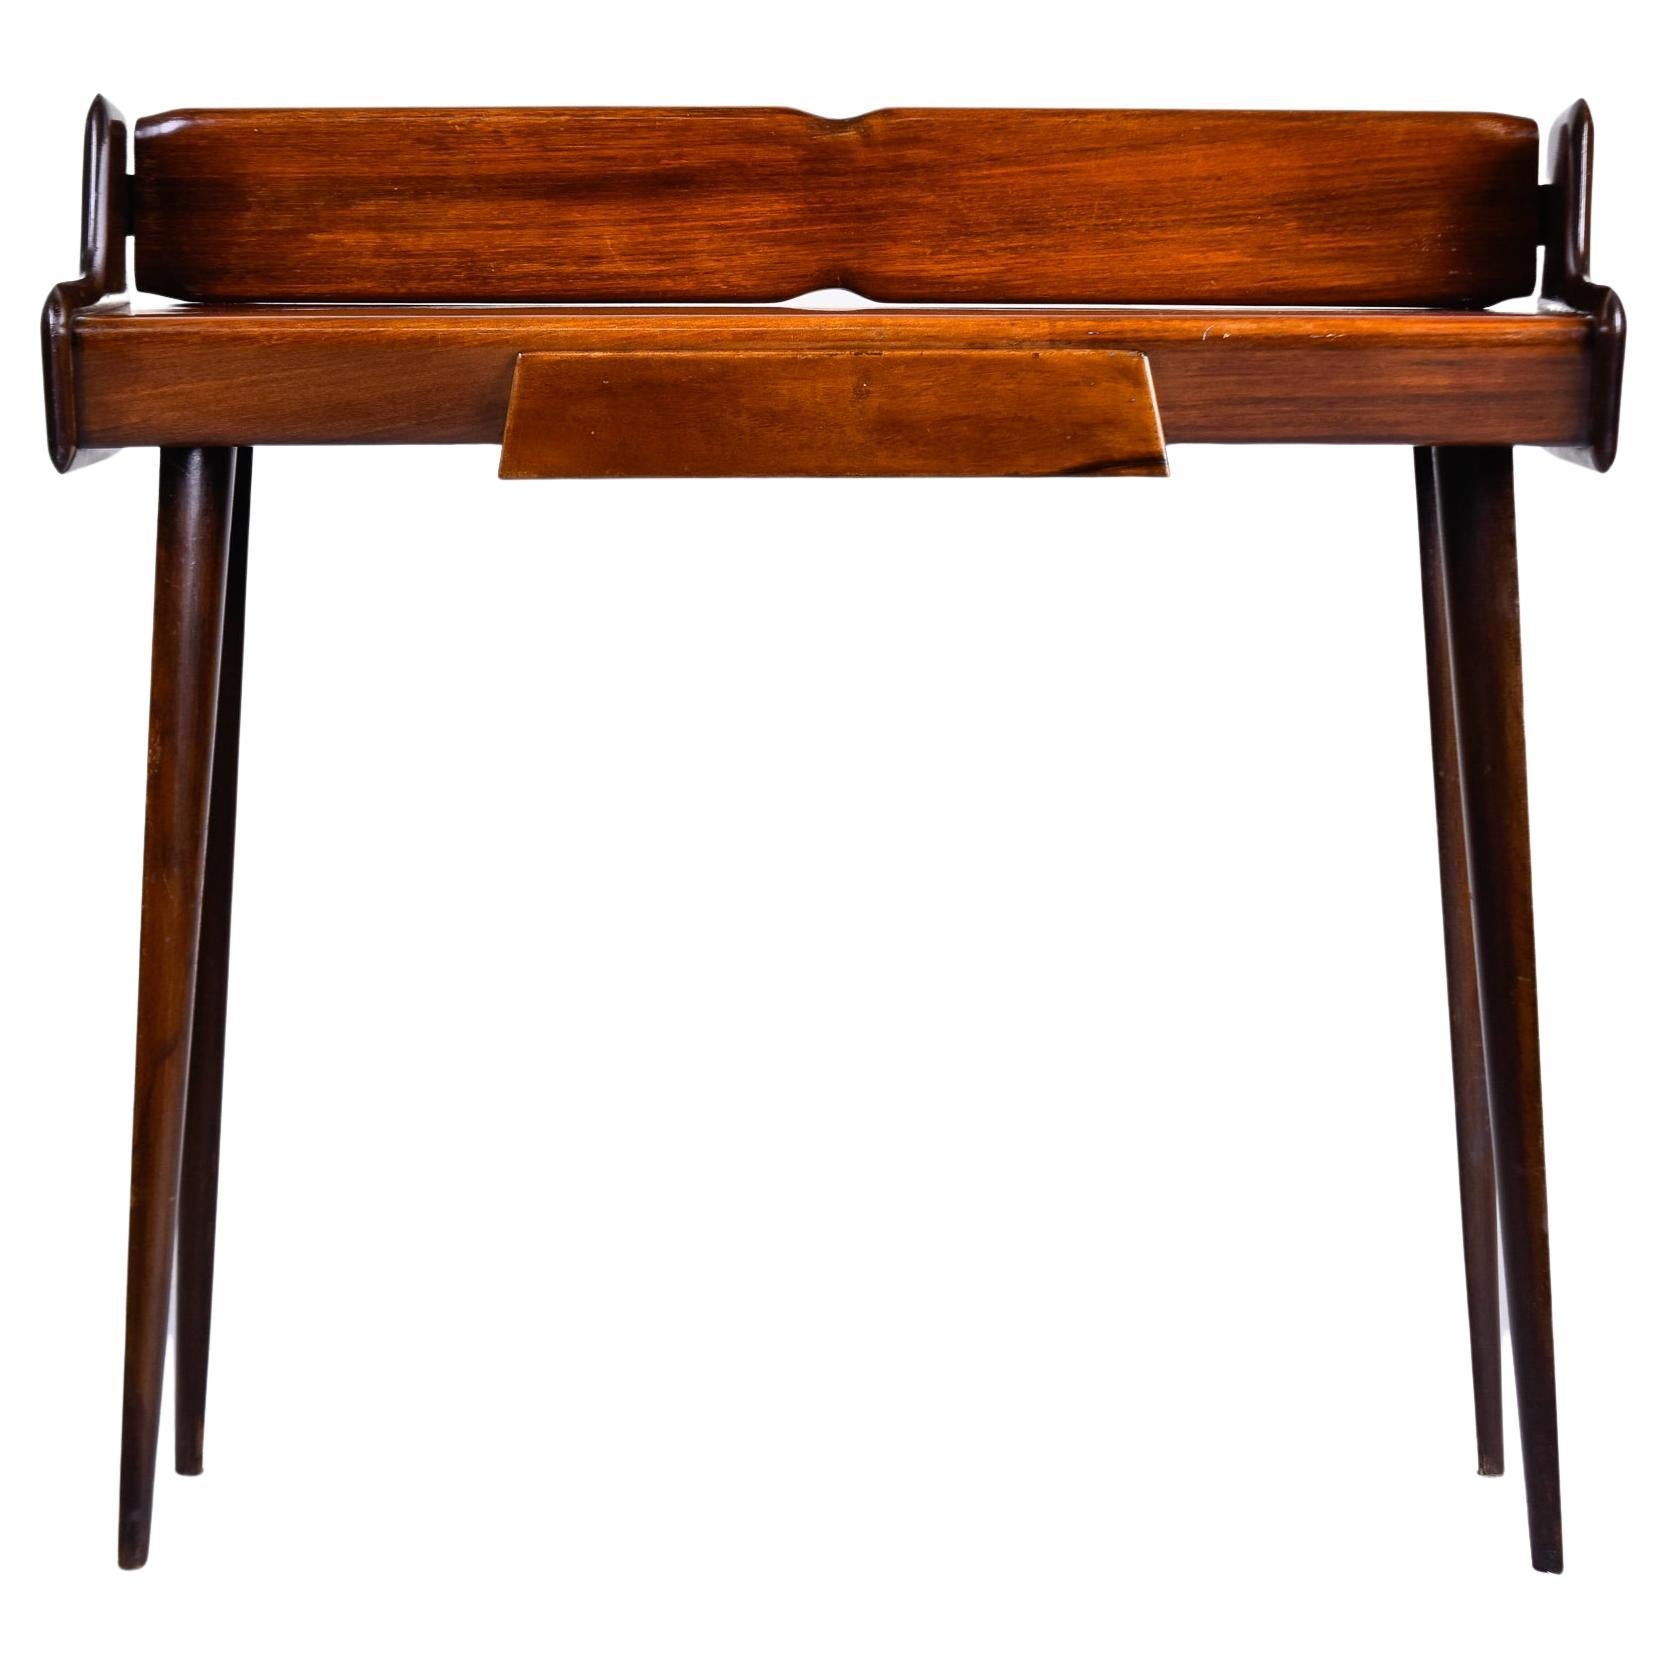 Found in Italy, this small console dates from the early 1960s or late 1950s. Made of mahogany with a medium stained finish. Single functional drawer, tapered legs and an unusual shape, this piece is very versatile. Unknown maker.

Top Surface: